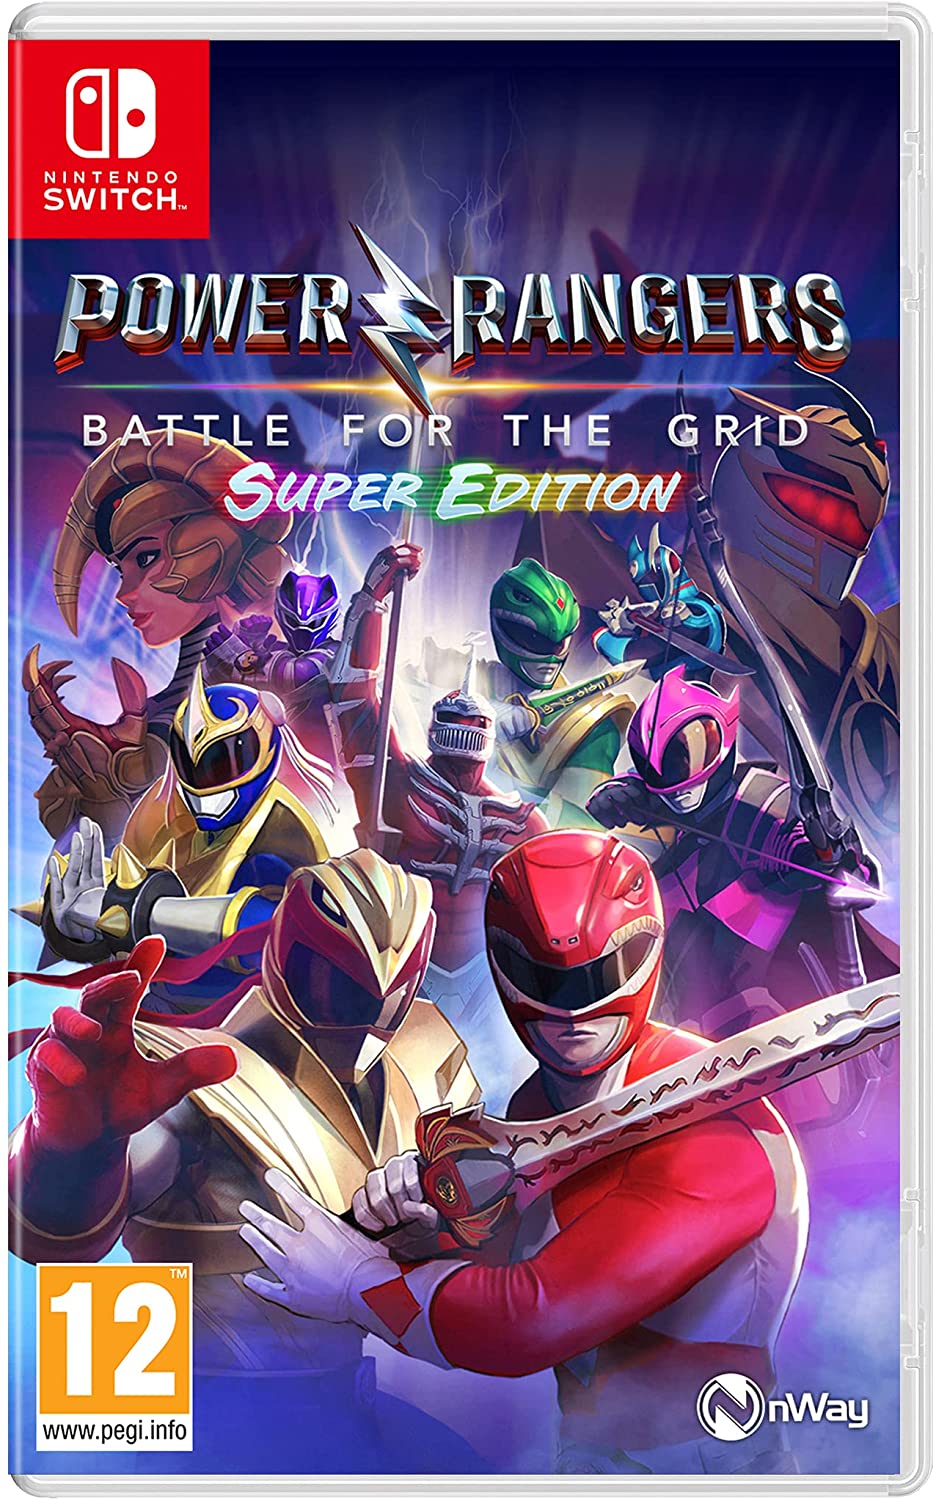 Power Rangers Battle for the Grid Super Edition (Nintendo Switch)